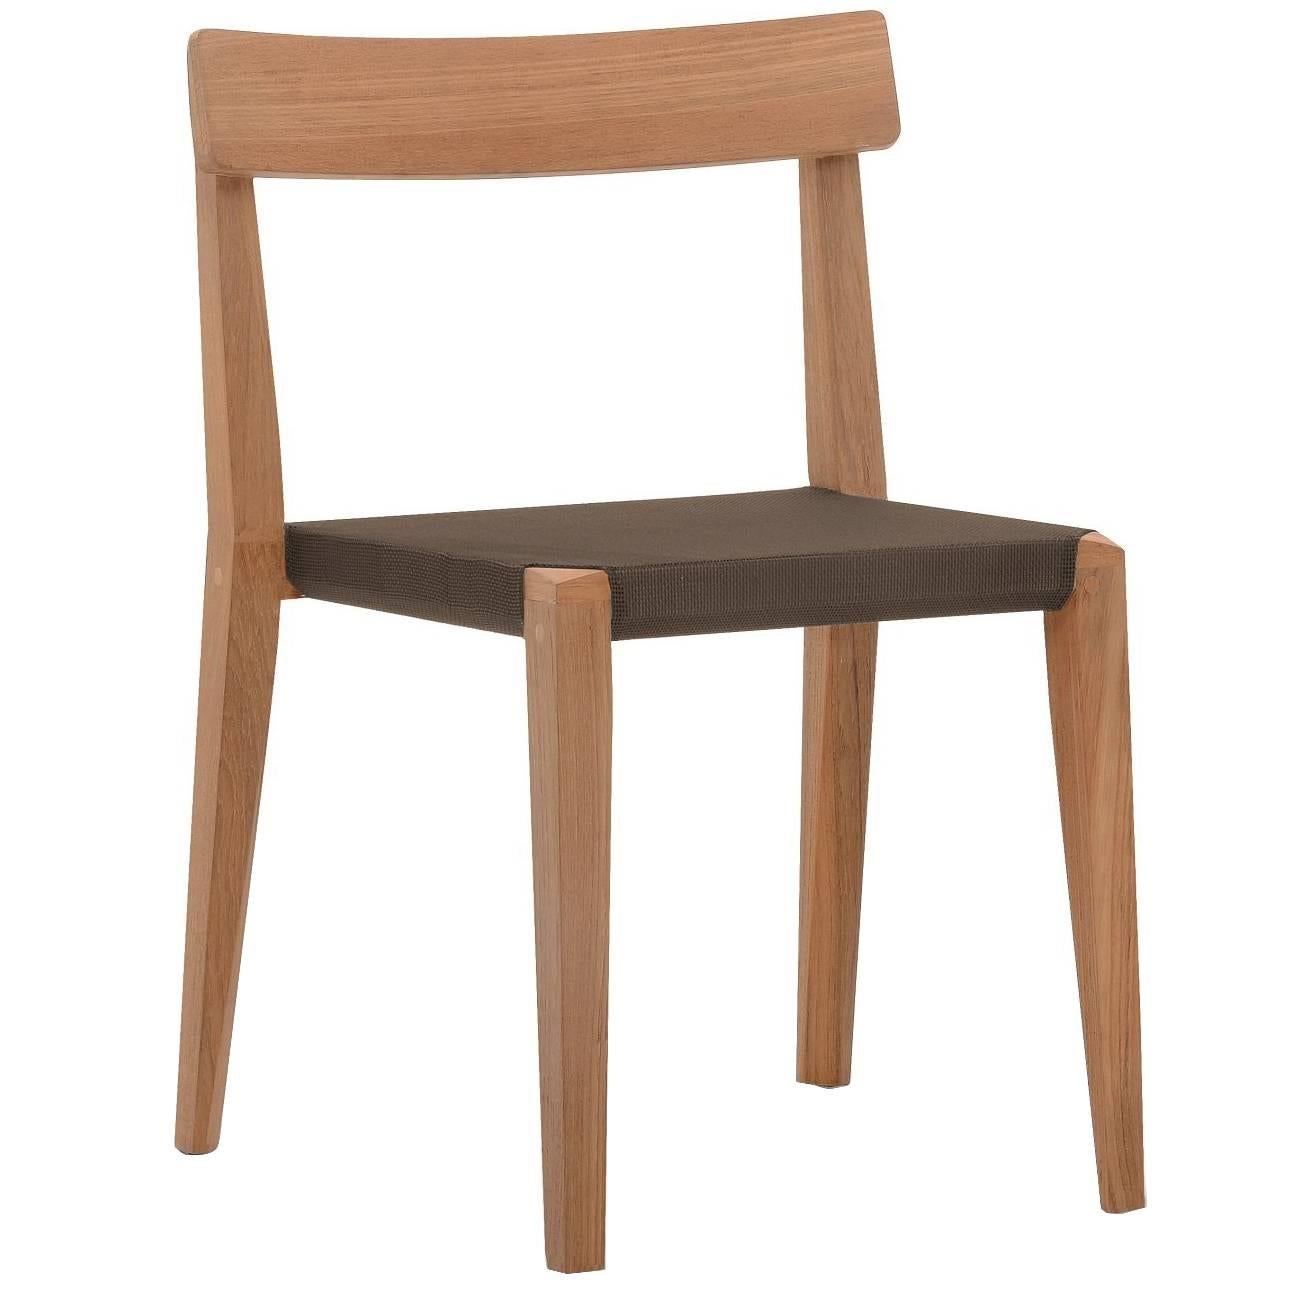 Roda Teka 171 Indoor/Outdoor Stacking Chair Designed by Gordon Guillaumier For Sale